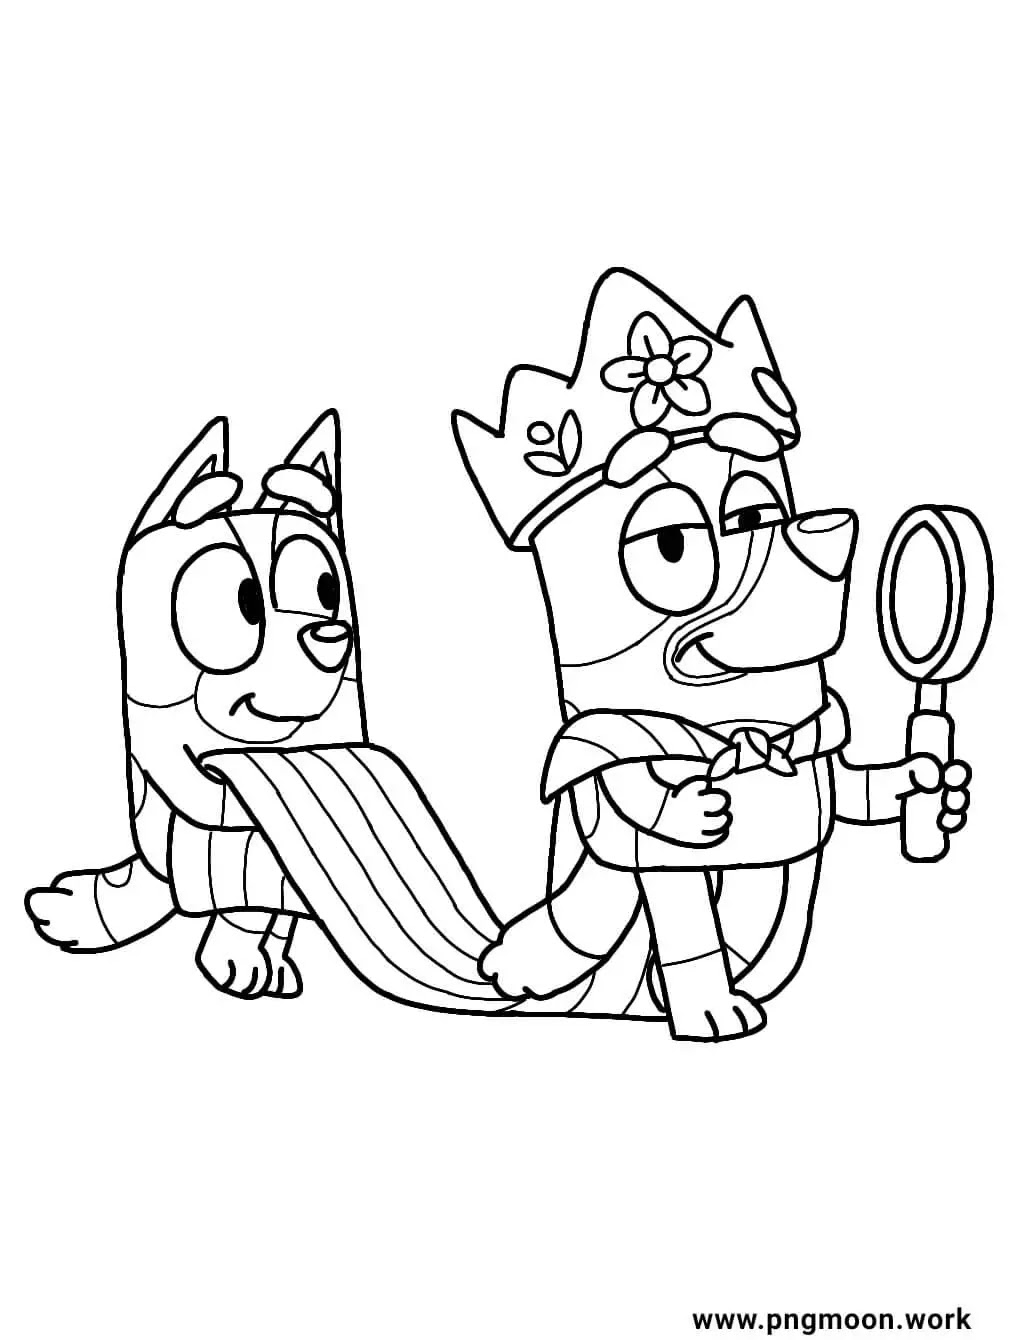 Bluey Coloring Pages   Pngmoon  PNG images, Coloring Pages